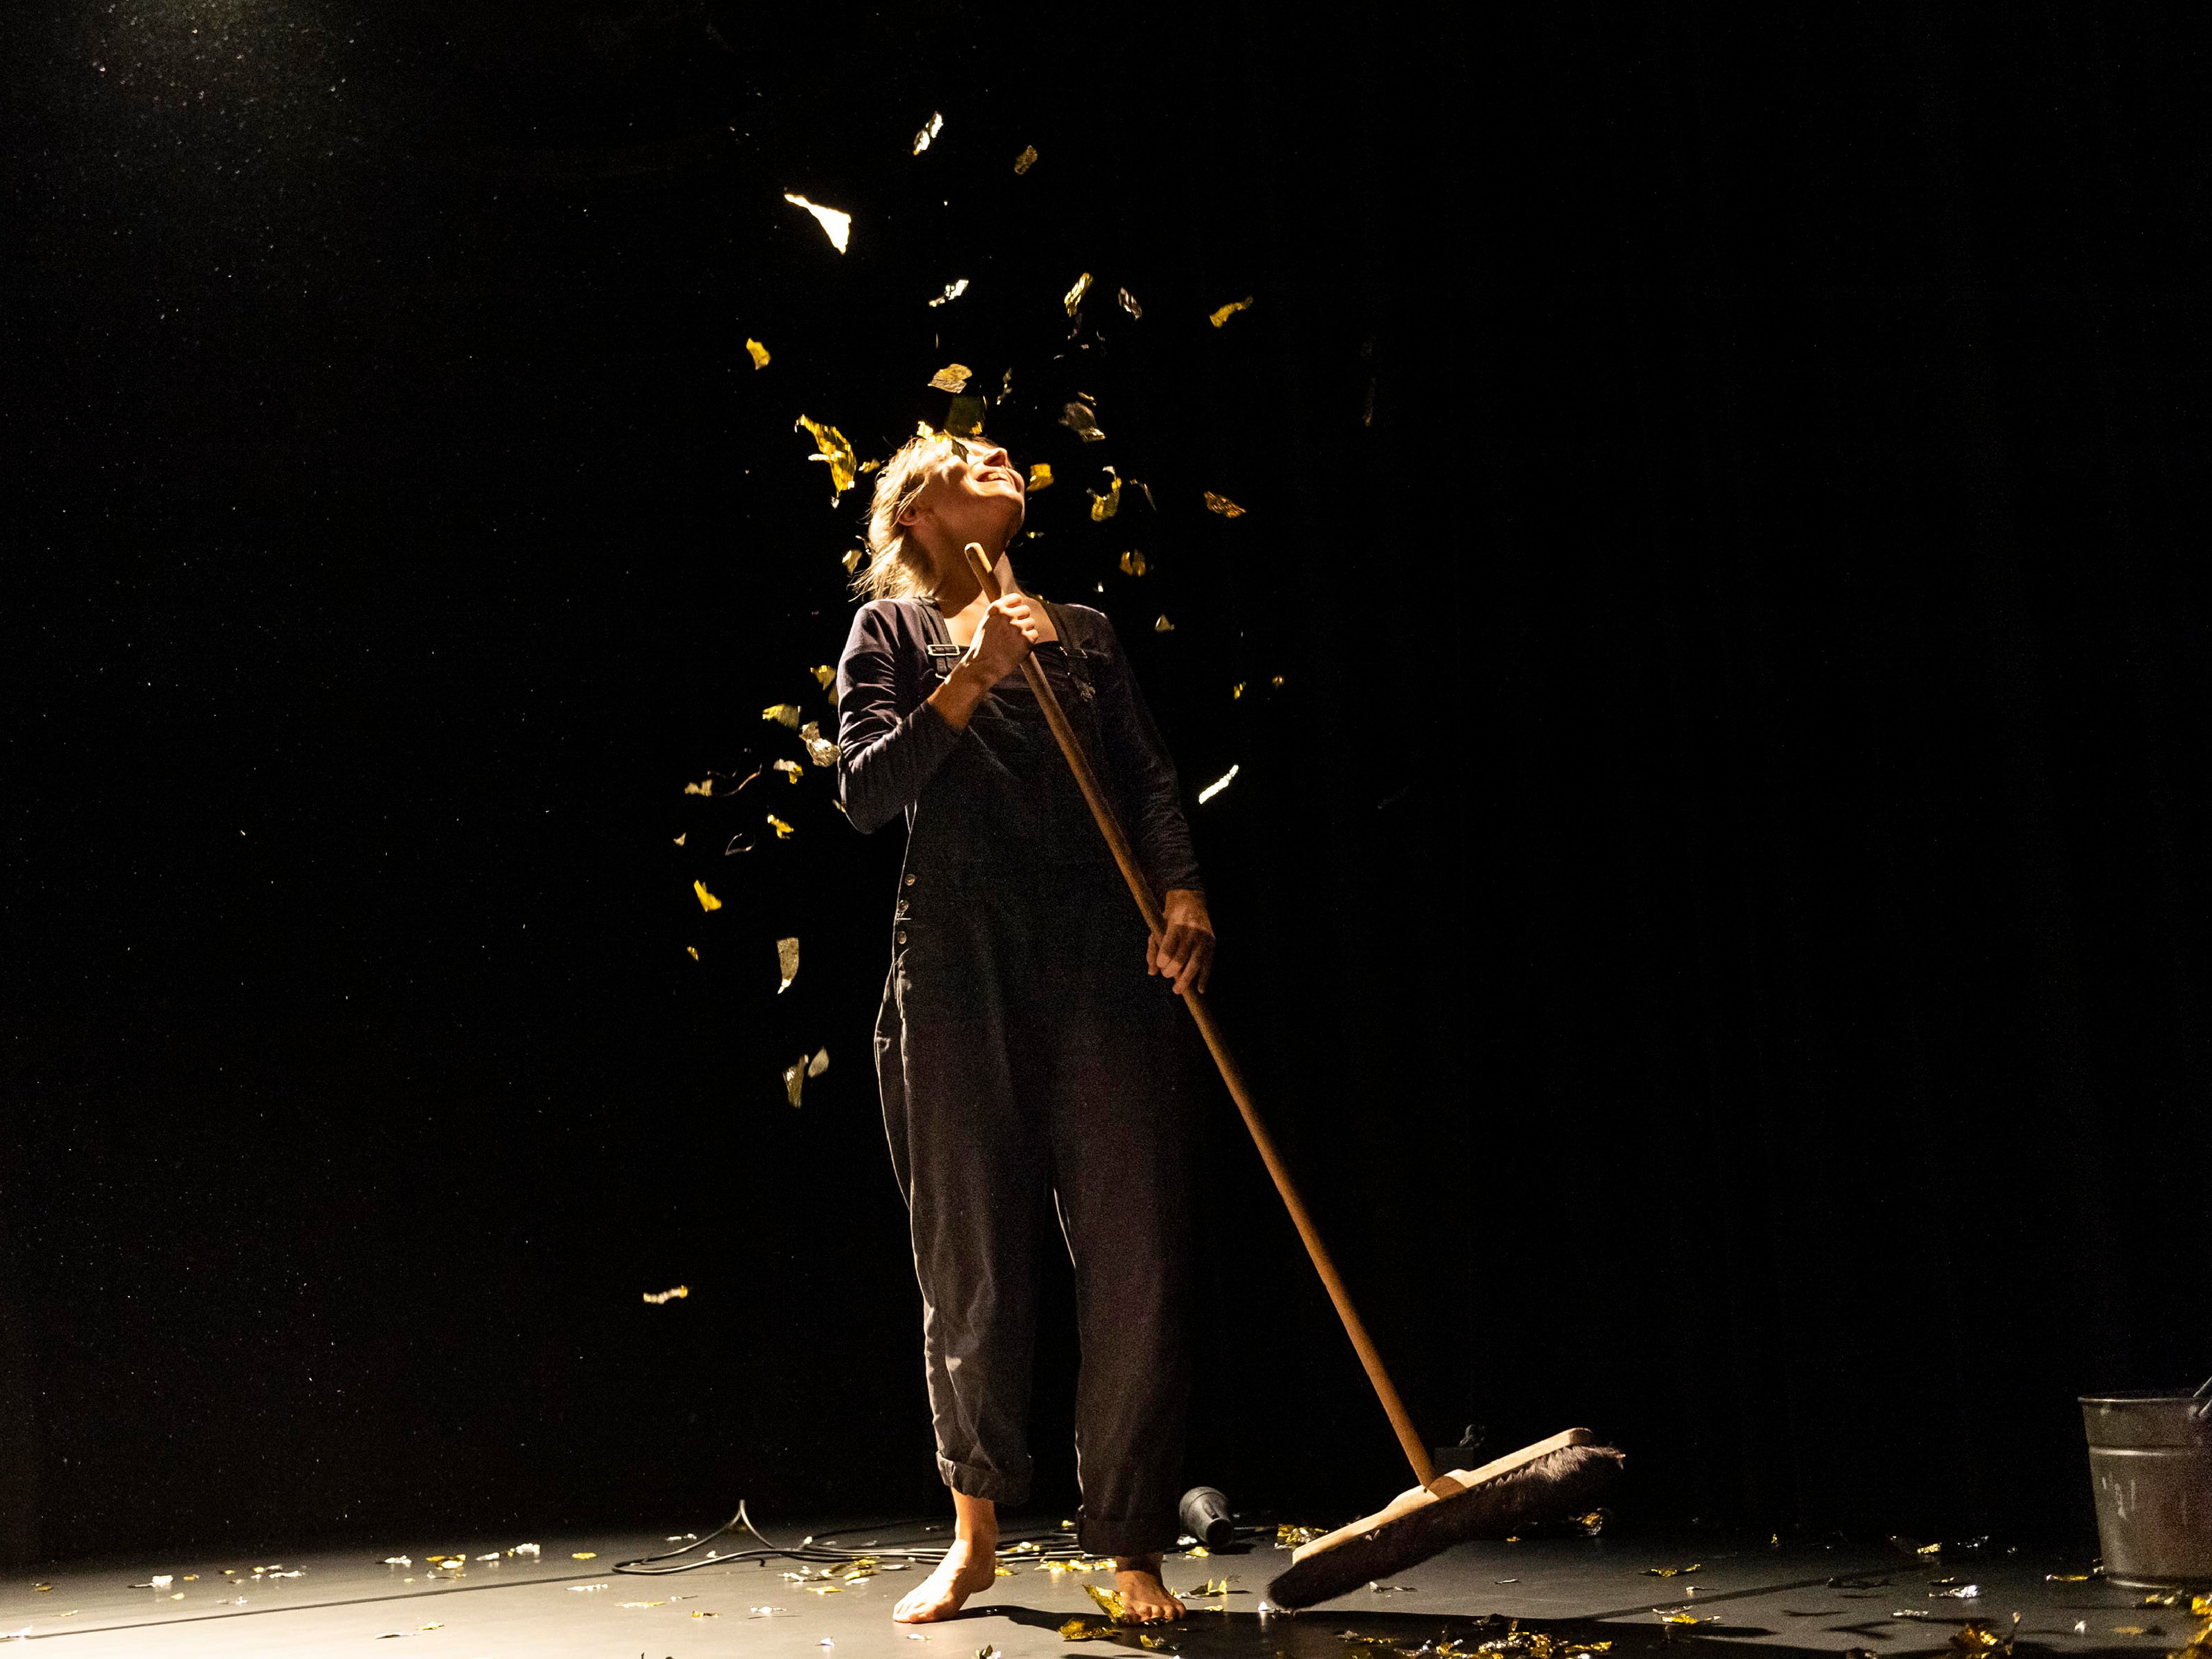 Gold confetti rains down from the ceiling onto the darkly lit stage on player Karoline Hoffmann. She raises her head to the confetti and holds a long-handled broom in her hand.